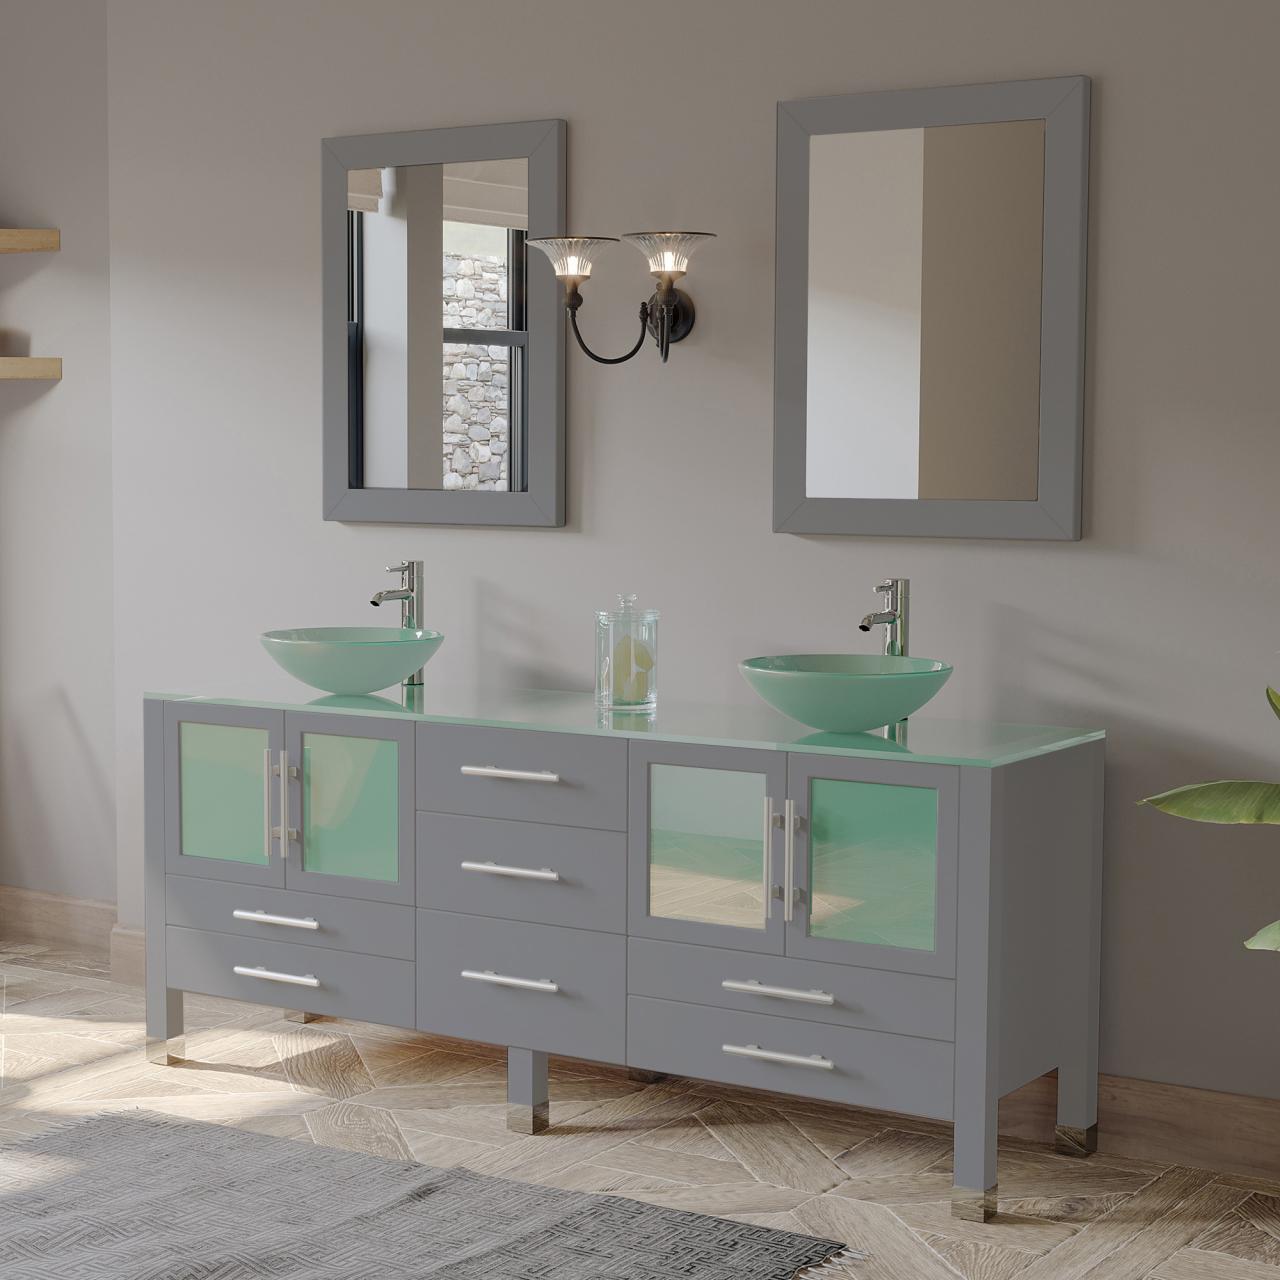 71" Double Sink Bathroom Vanity Set in Modern Gray Finish with Polished